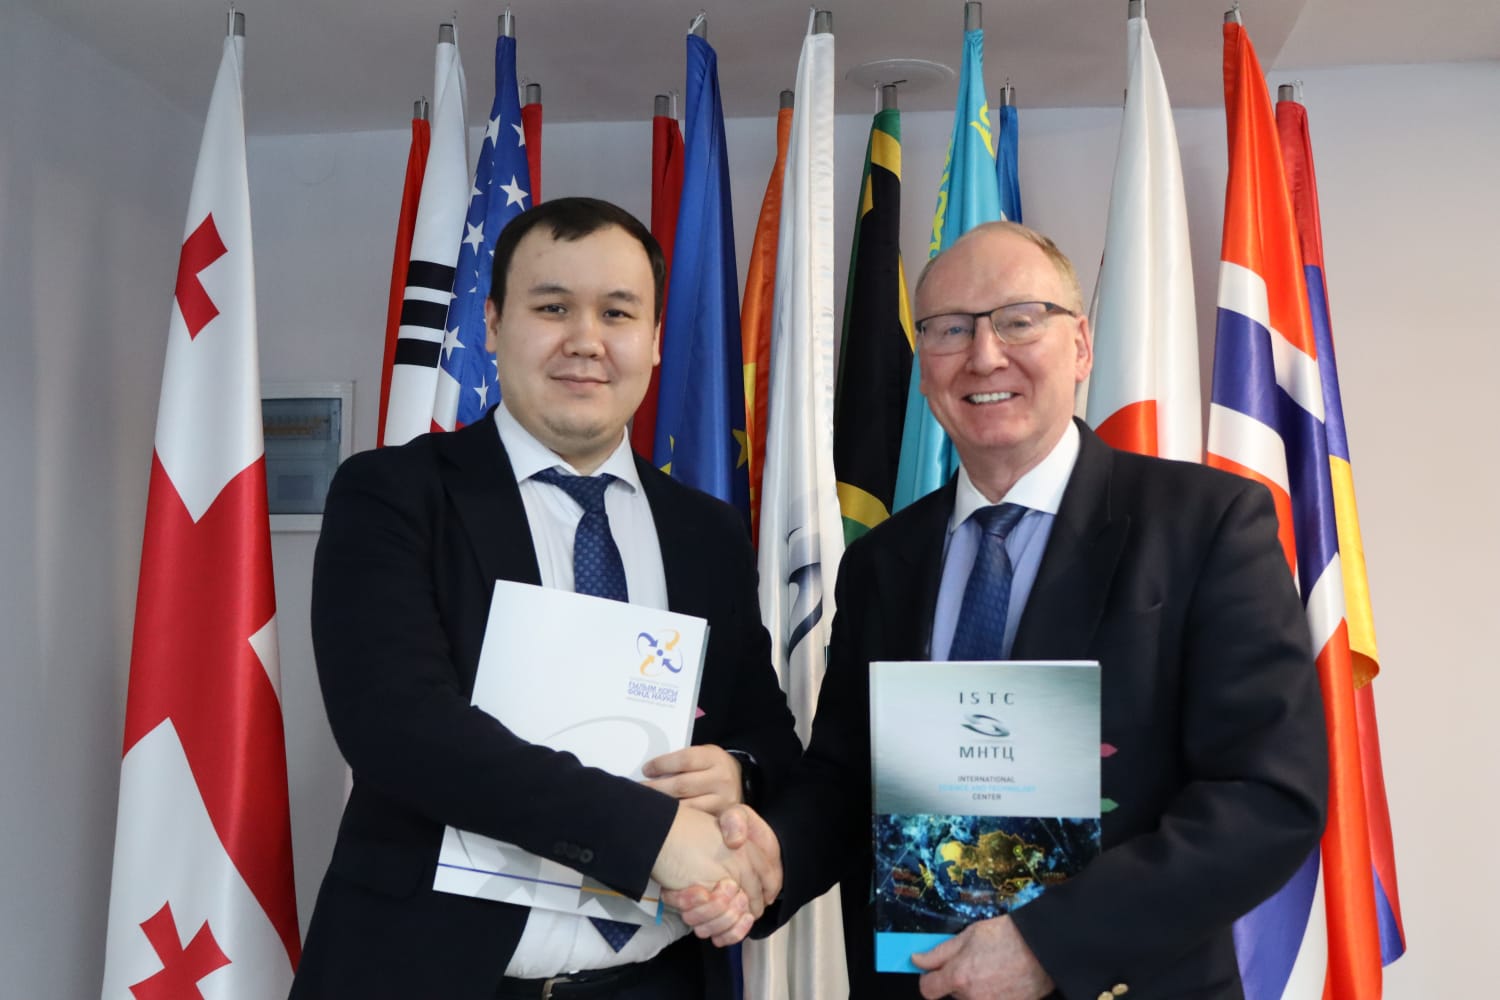 ISTC and the Science Fund signed an Agreement of Cooperation